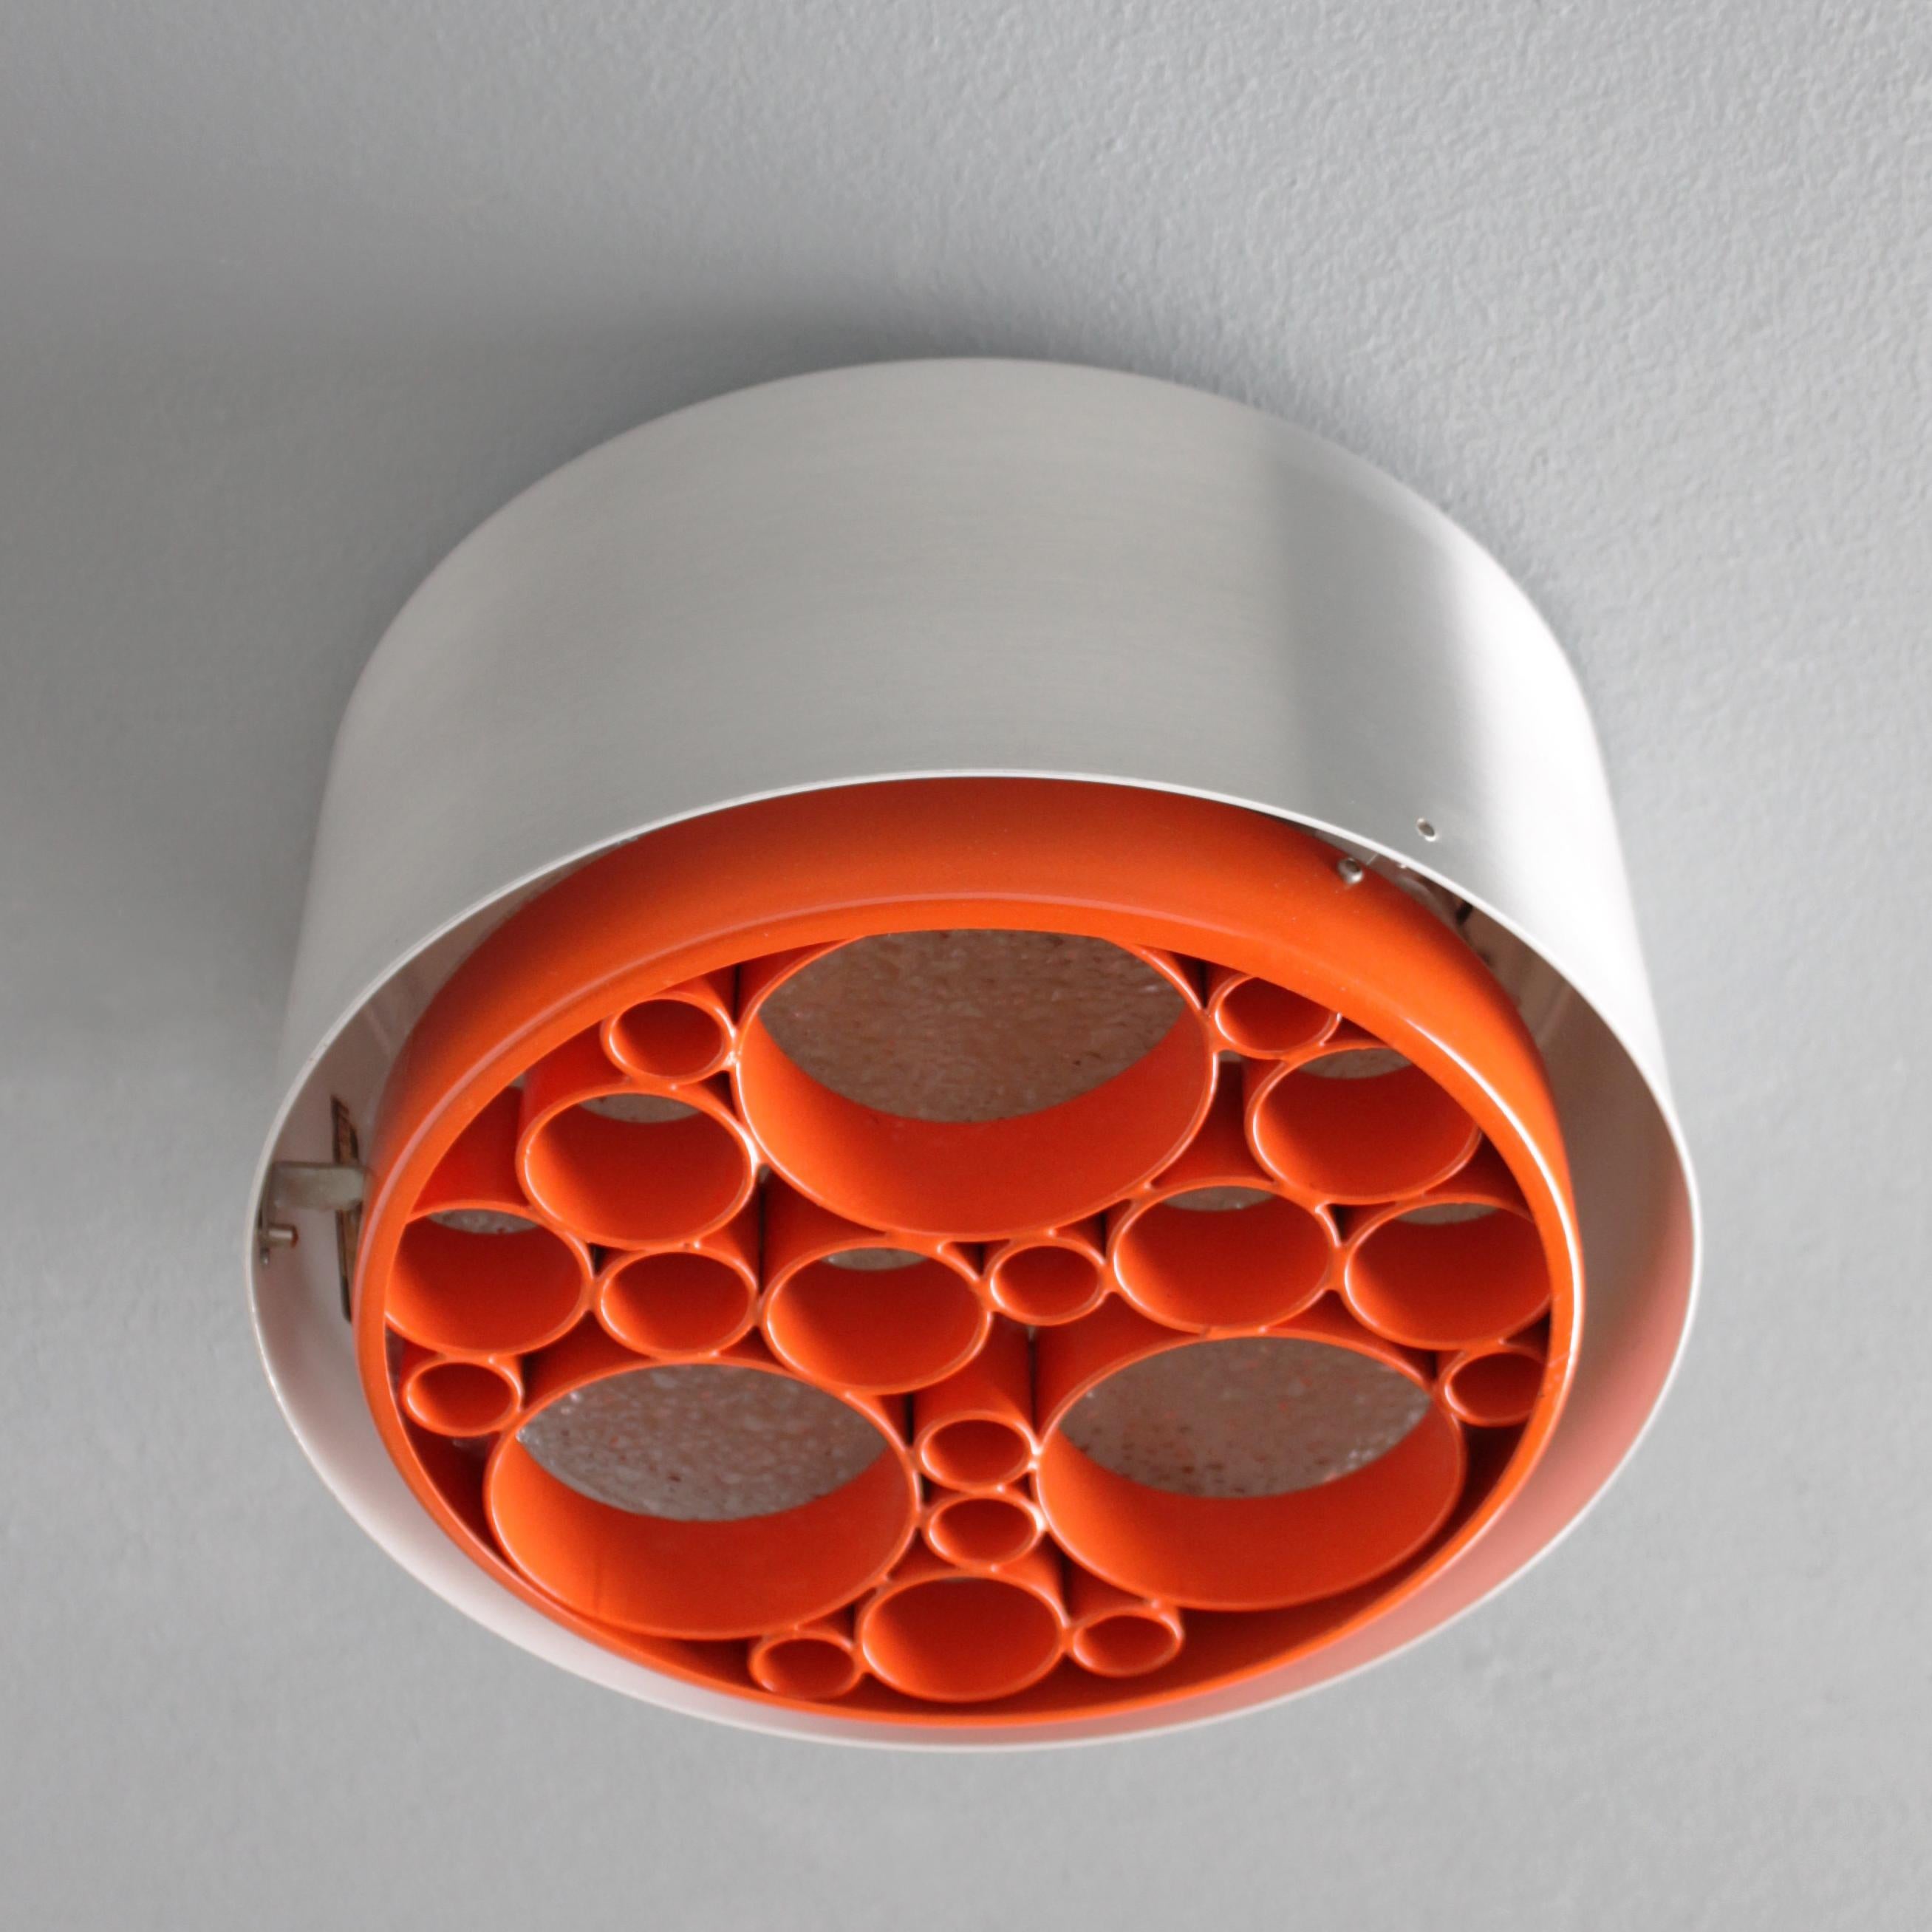 Flush mount 'Alliance' by Raak Amsterdam Holland. This is an early production with the orange rings in metal. Model P-1462.23. One bulb E27/E26 of max 60 watt, the electricity is used but in a good condition, approved to European